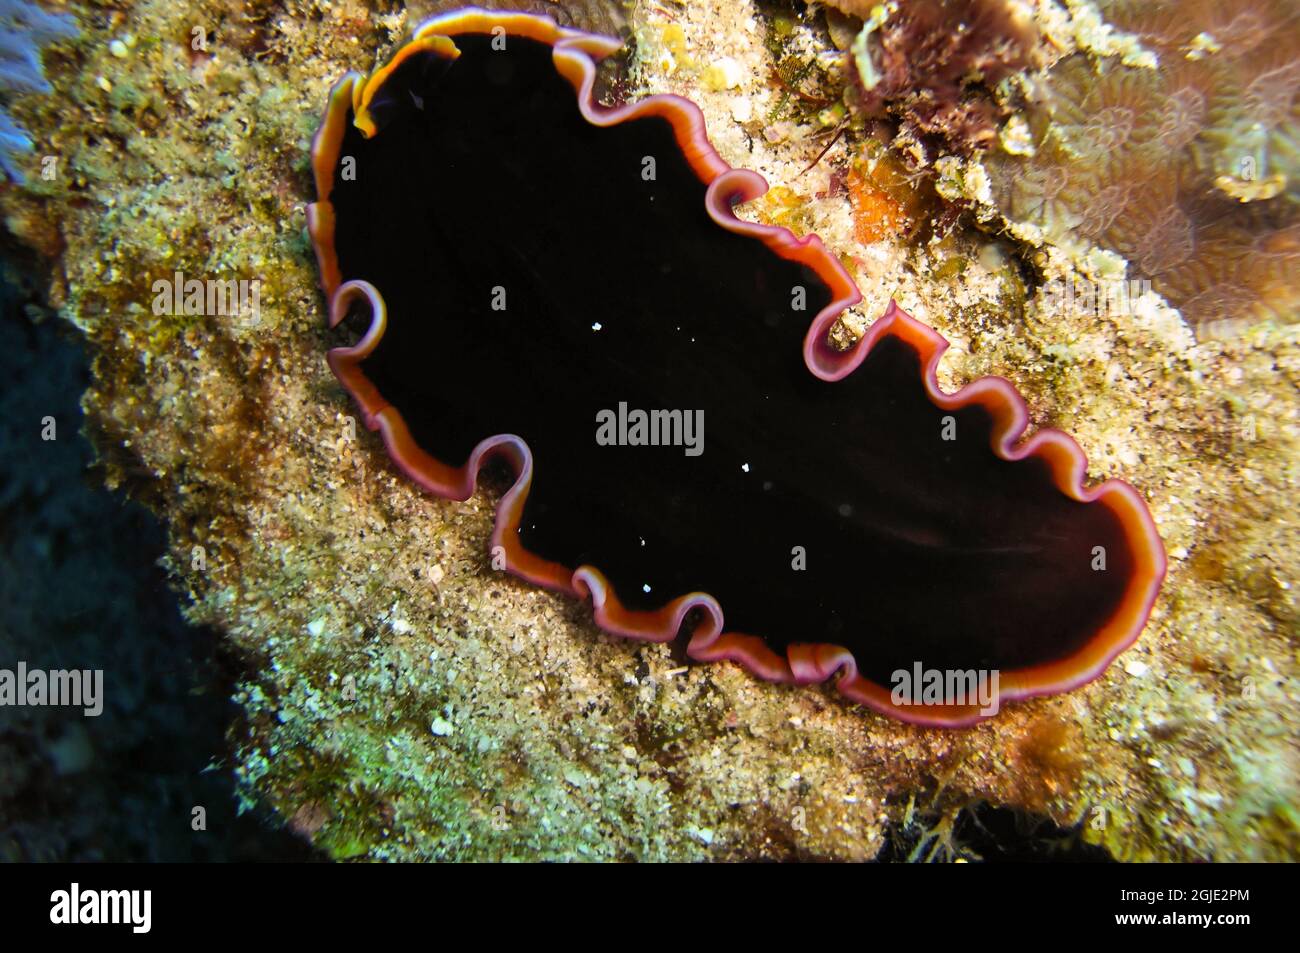 Black Platworm (Platyhelminthes) on the ground in the filipino sea January 18, 2012 Stock Photo